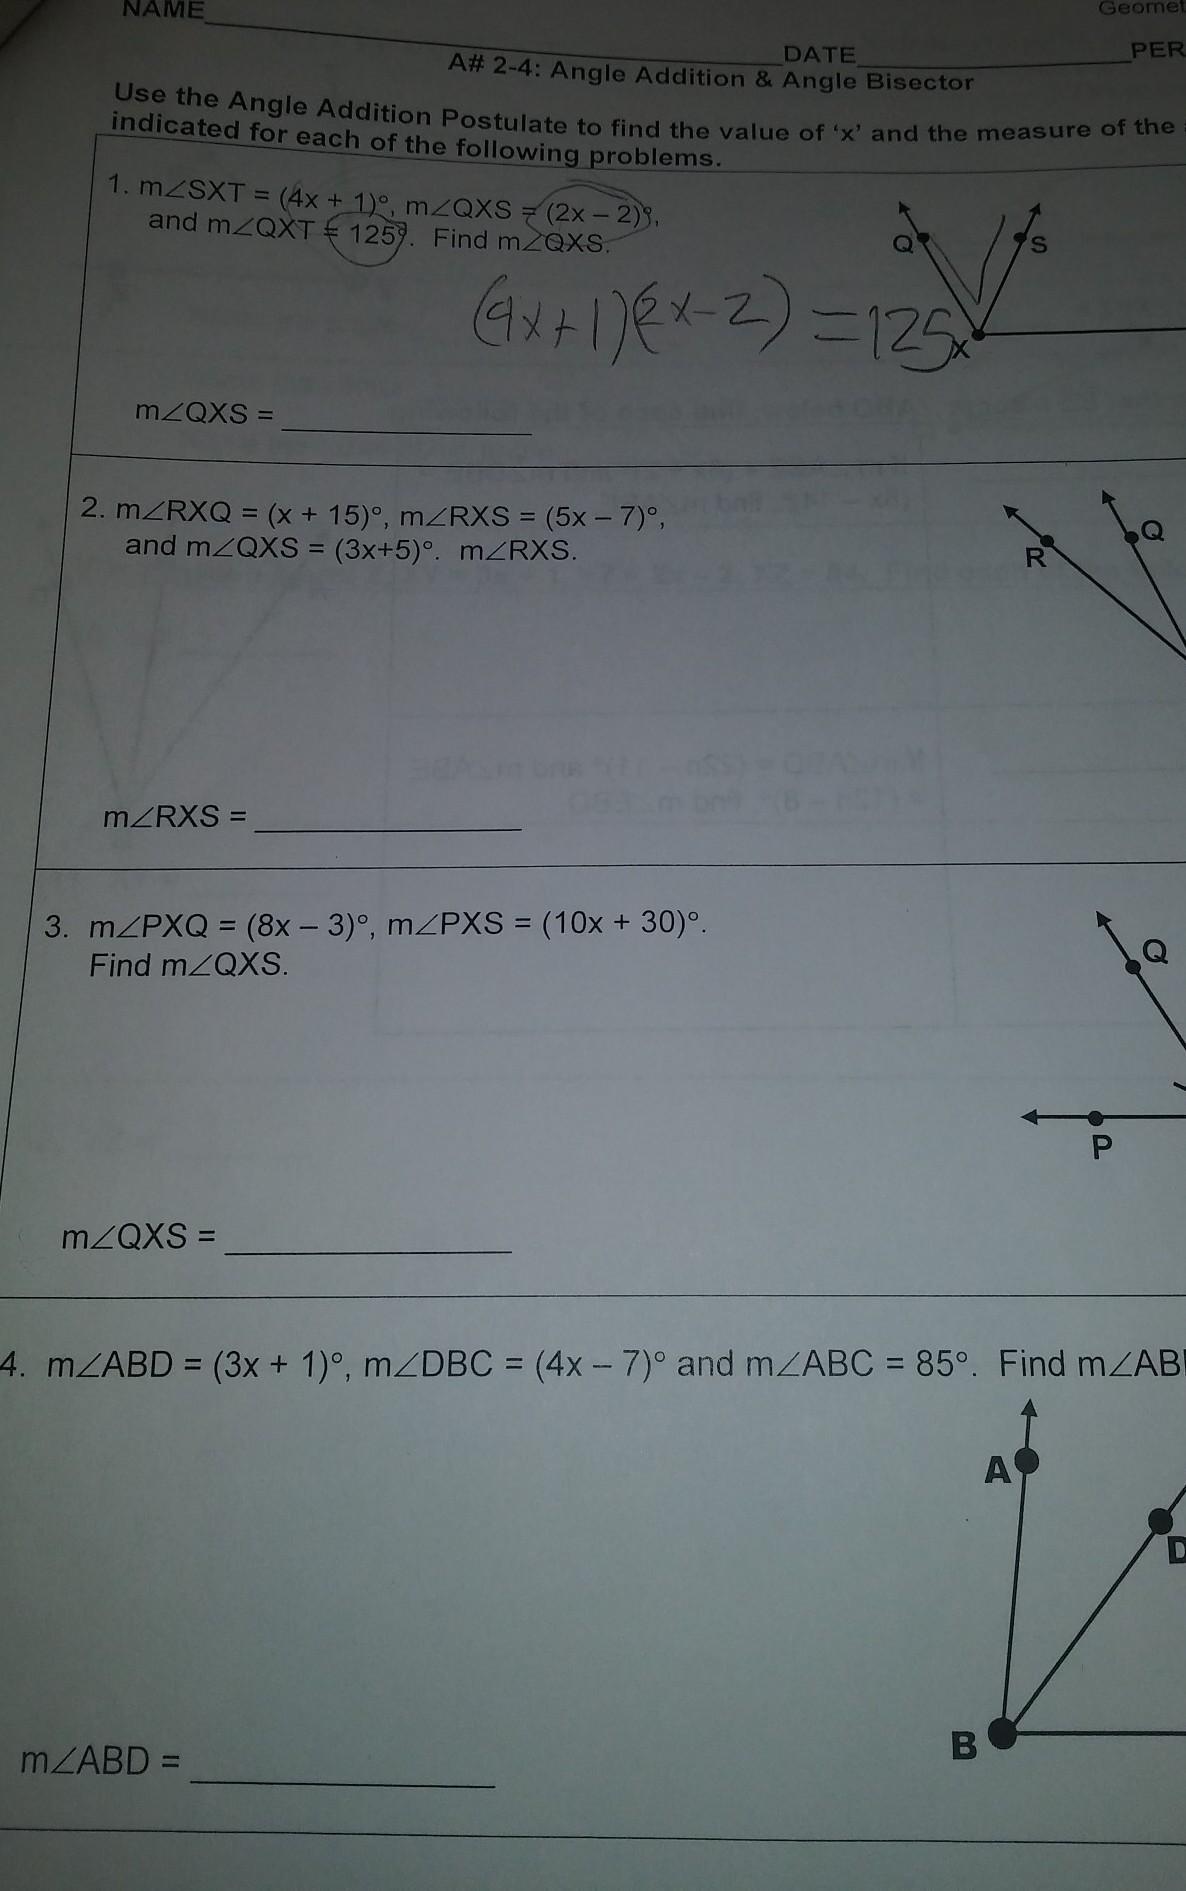 Need Helpp Pls I Don't Know How To Do It.